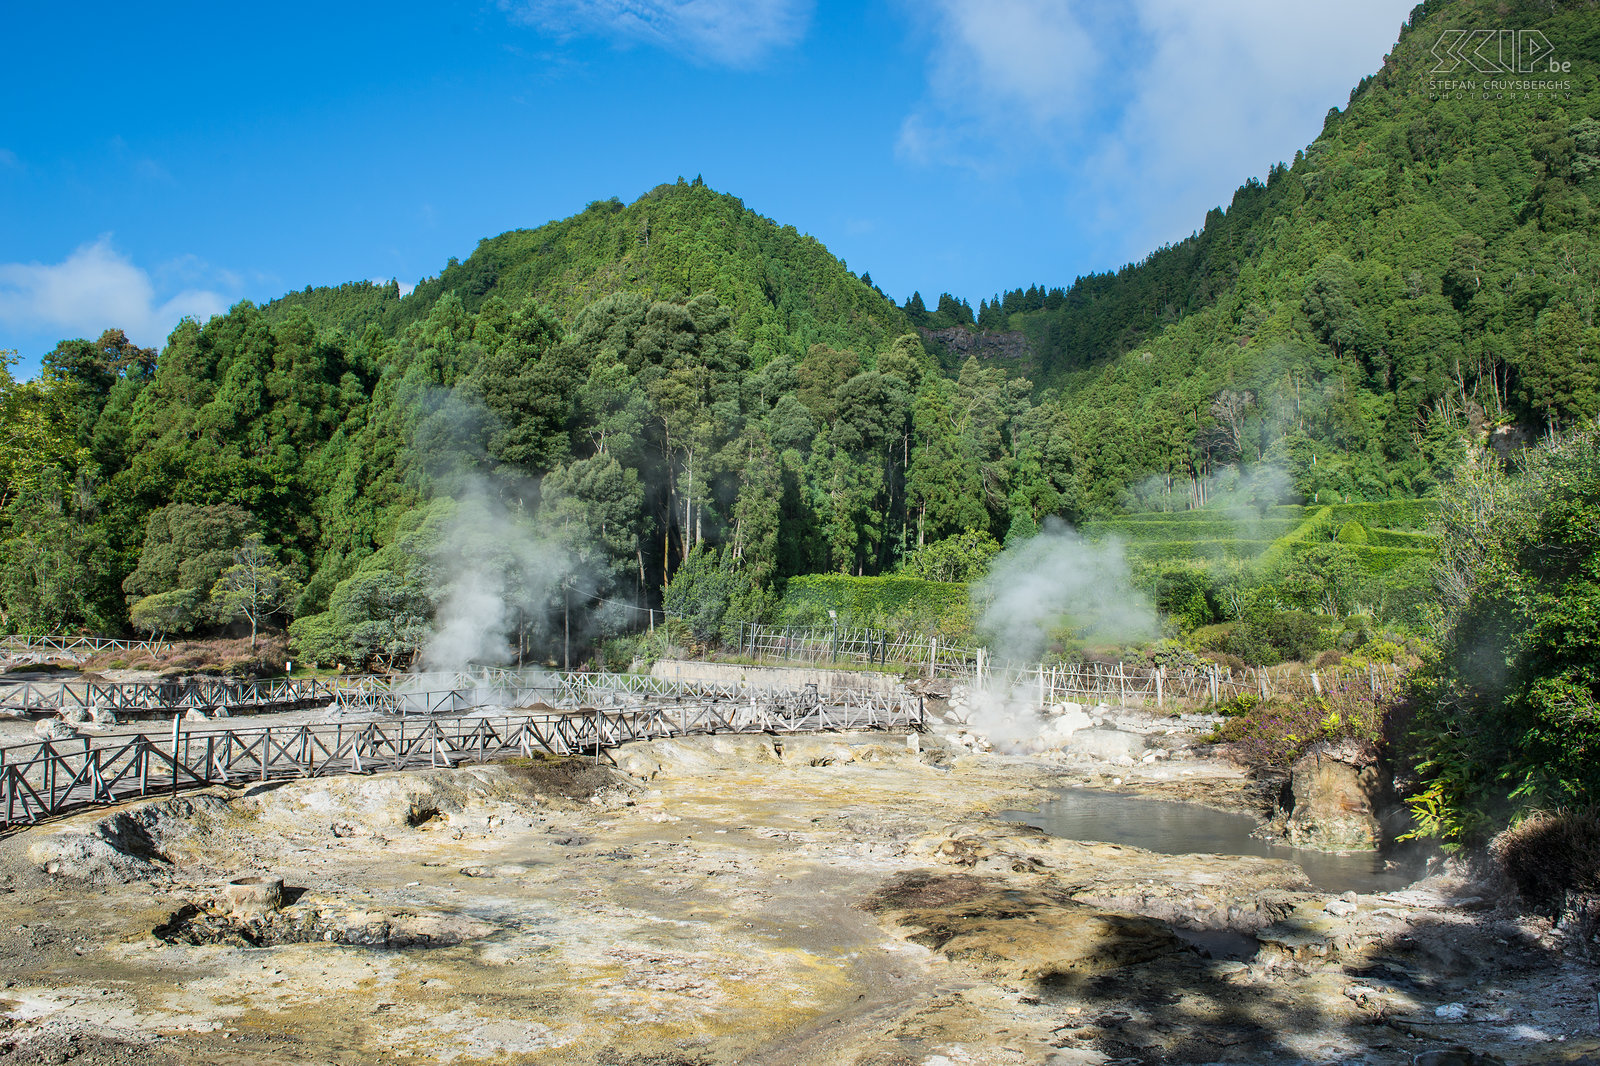 Lagoa das Furnas - Caldeiras Furnas is a volcano crater and the caldera is still active. At various points around Lagoa das Furnas you can see steam sources and holes in the ground. The local restaurants cook their stews 'Cozido nas Caldeira' in these pools. Stefan Cruysberghs